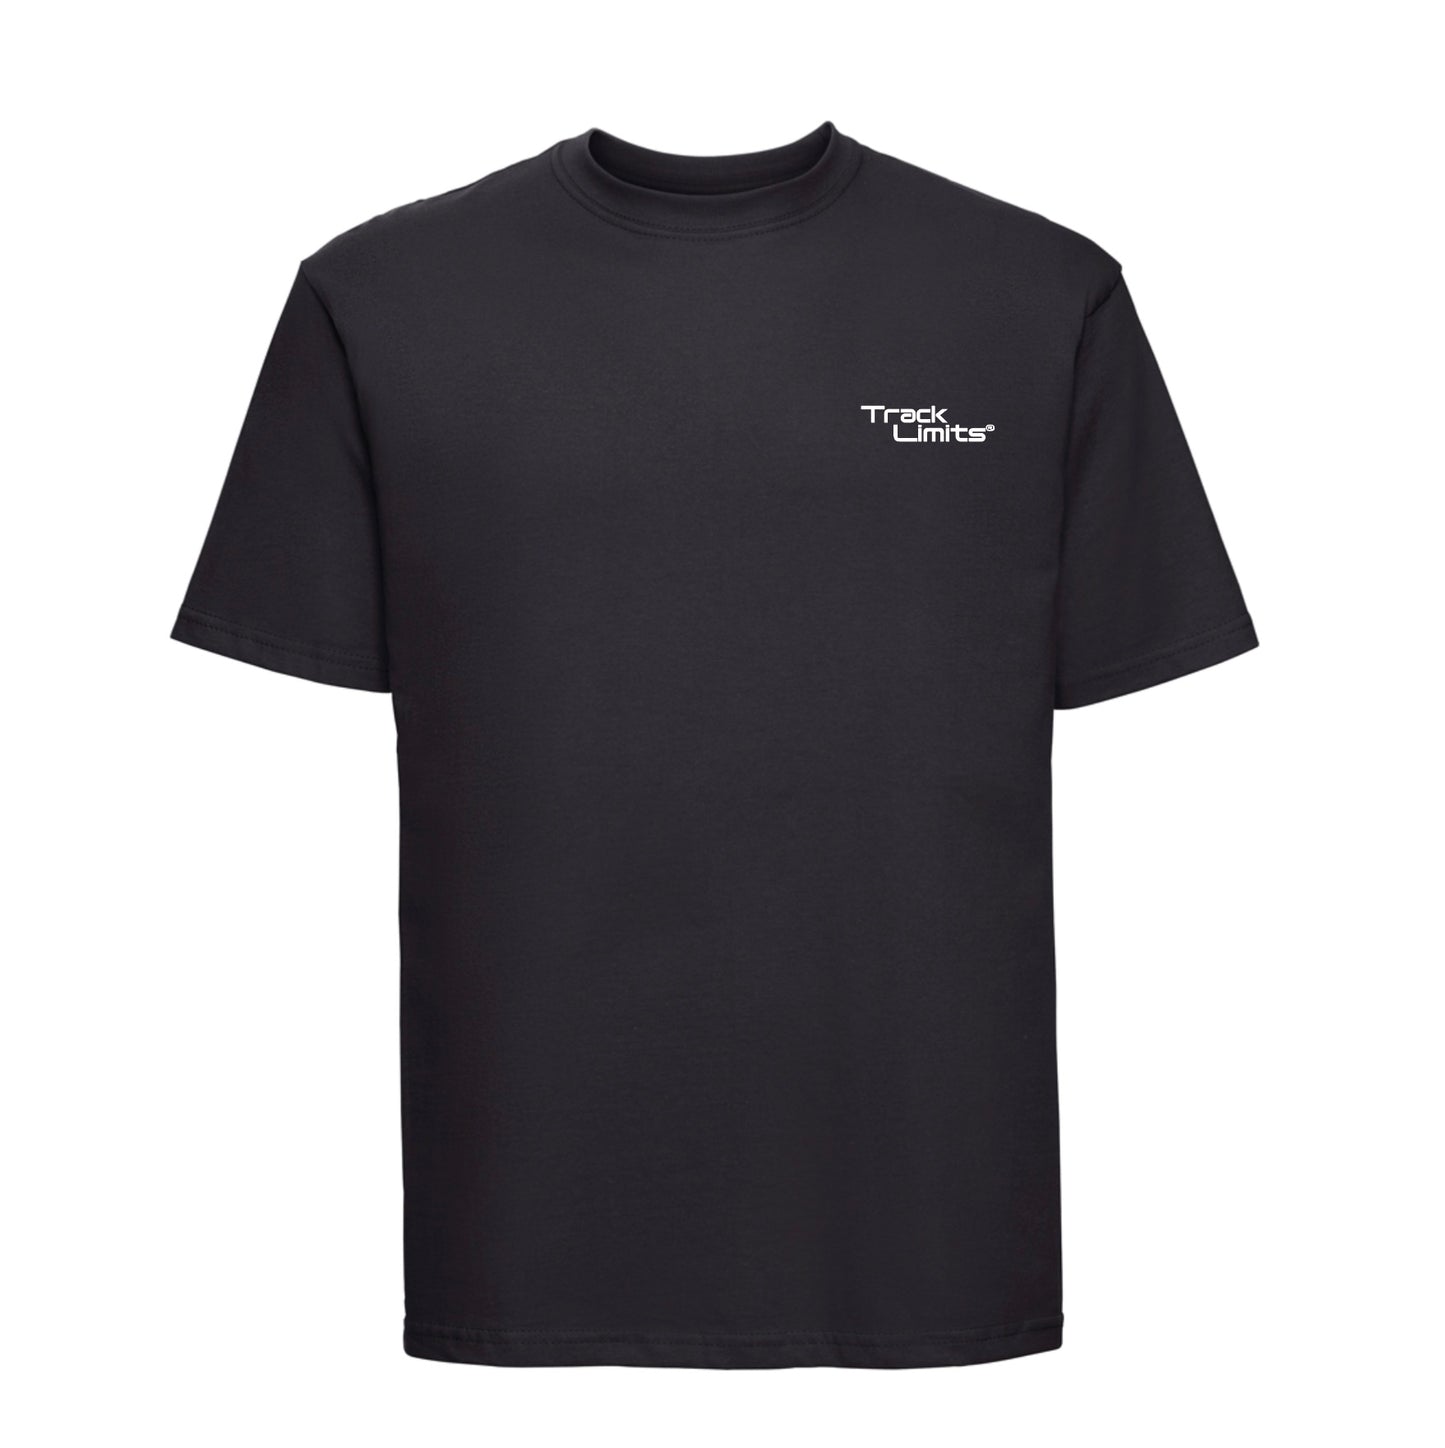 Track Limits T Shirt in black. On back all 2024 F1 Formula One racetrack circuits with country flags and names. Front Track Limits logo to left. Formula One Fans,Track Limits,Grand Prix. F1 2024 Circuits Country Flag. Track Limits clothing brand